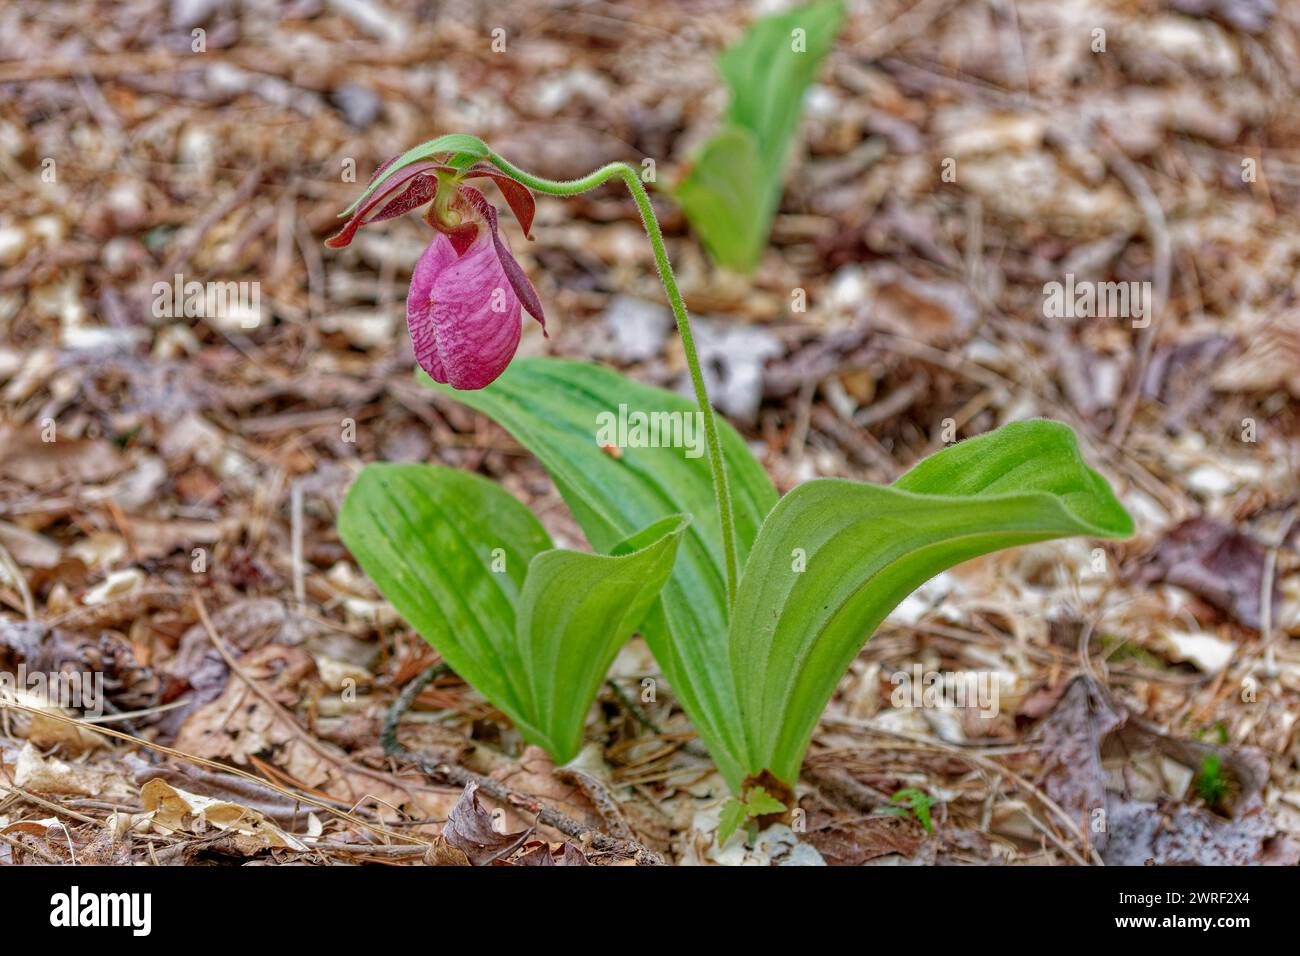 A flowering pink lady slipper plant in full bloom with another emerging alongside closeup view on the ground in the forest in springtime Stock Photo